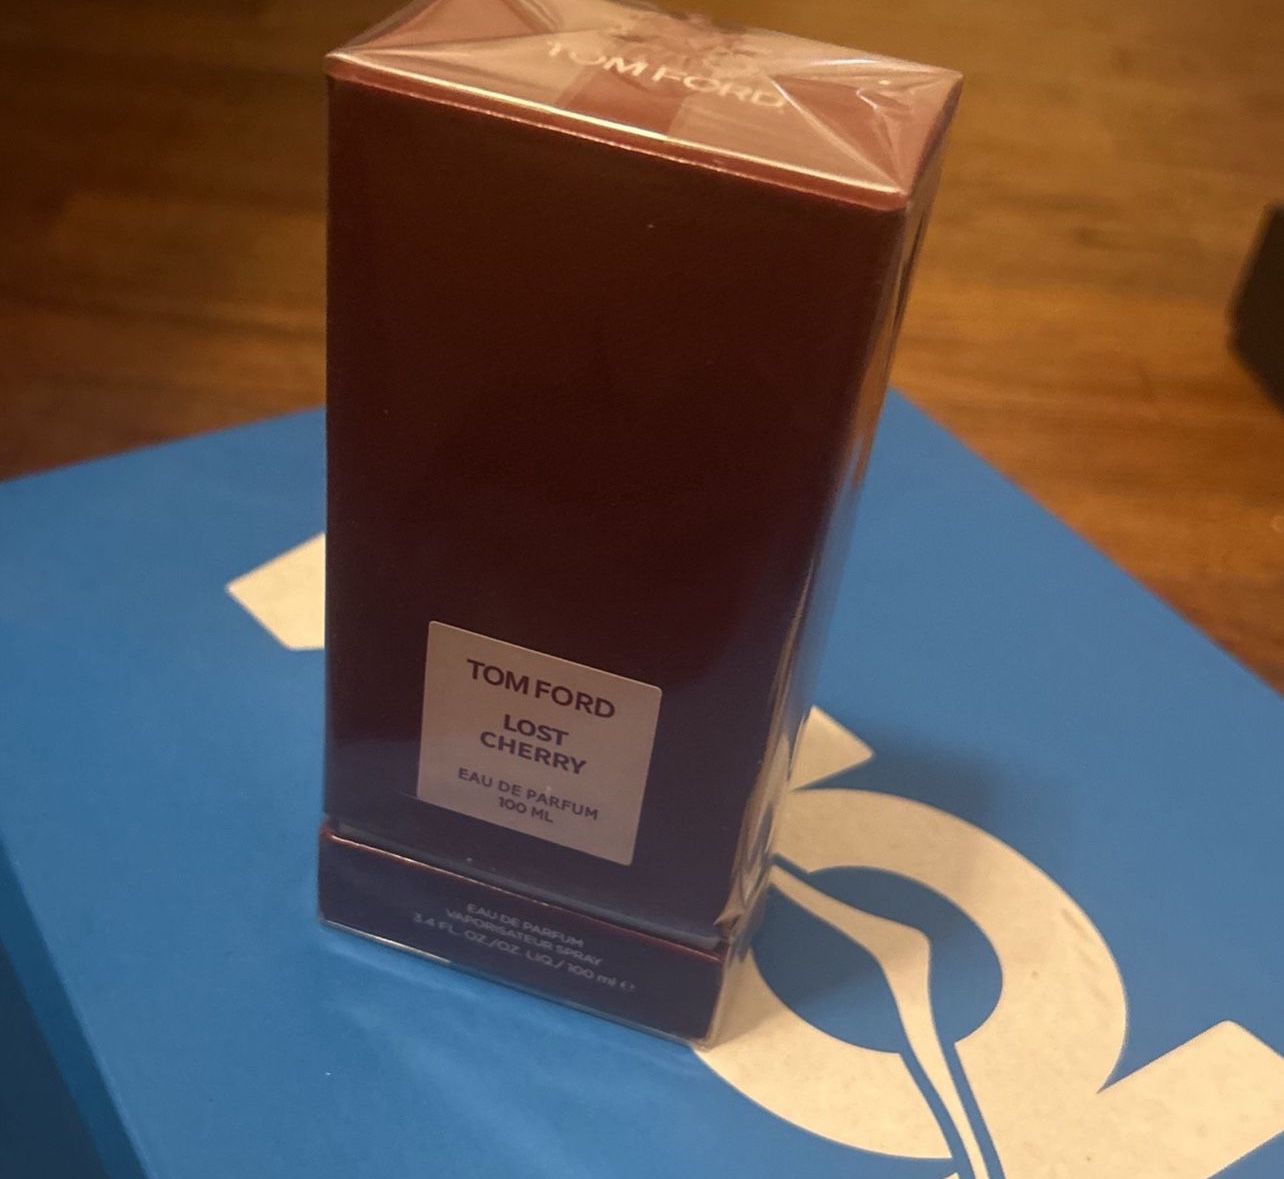 Tom Ford Lost Cherry 100ml